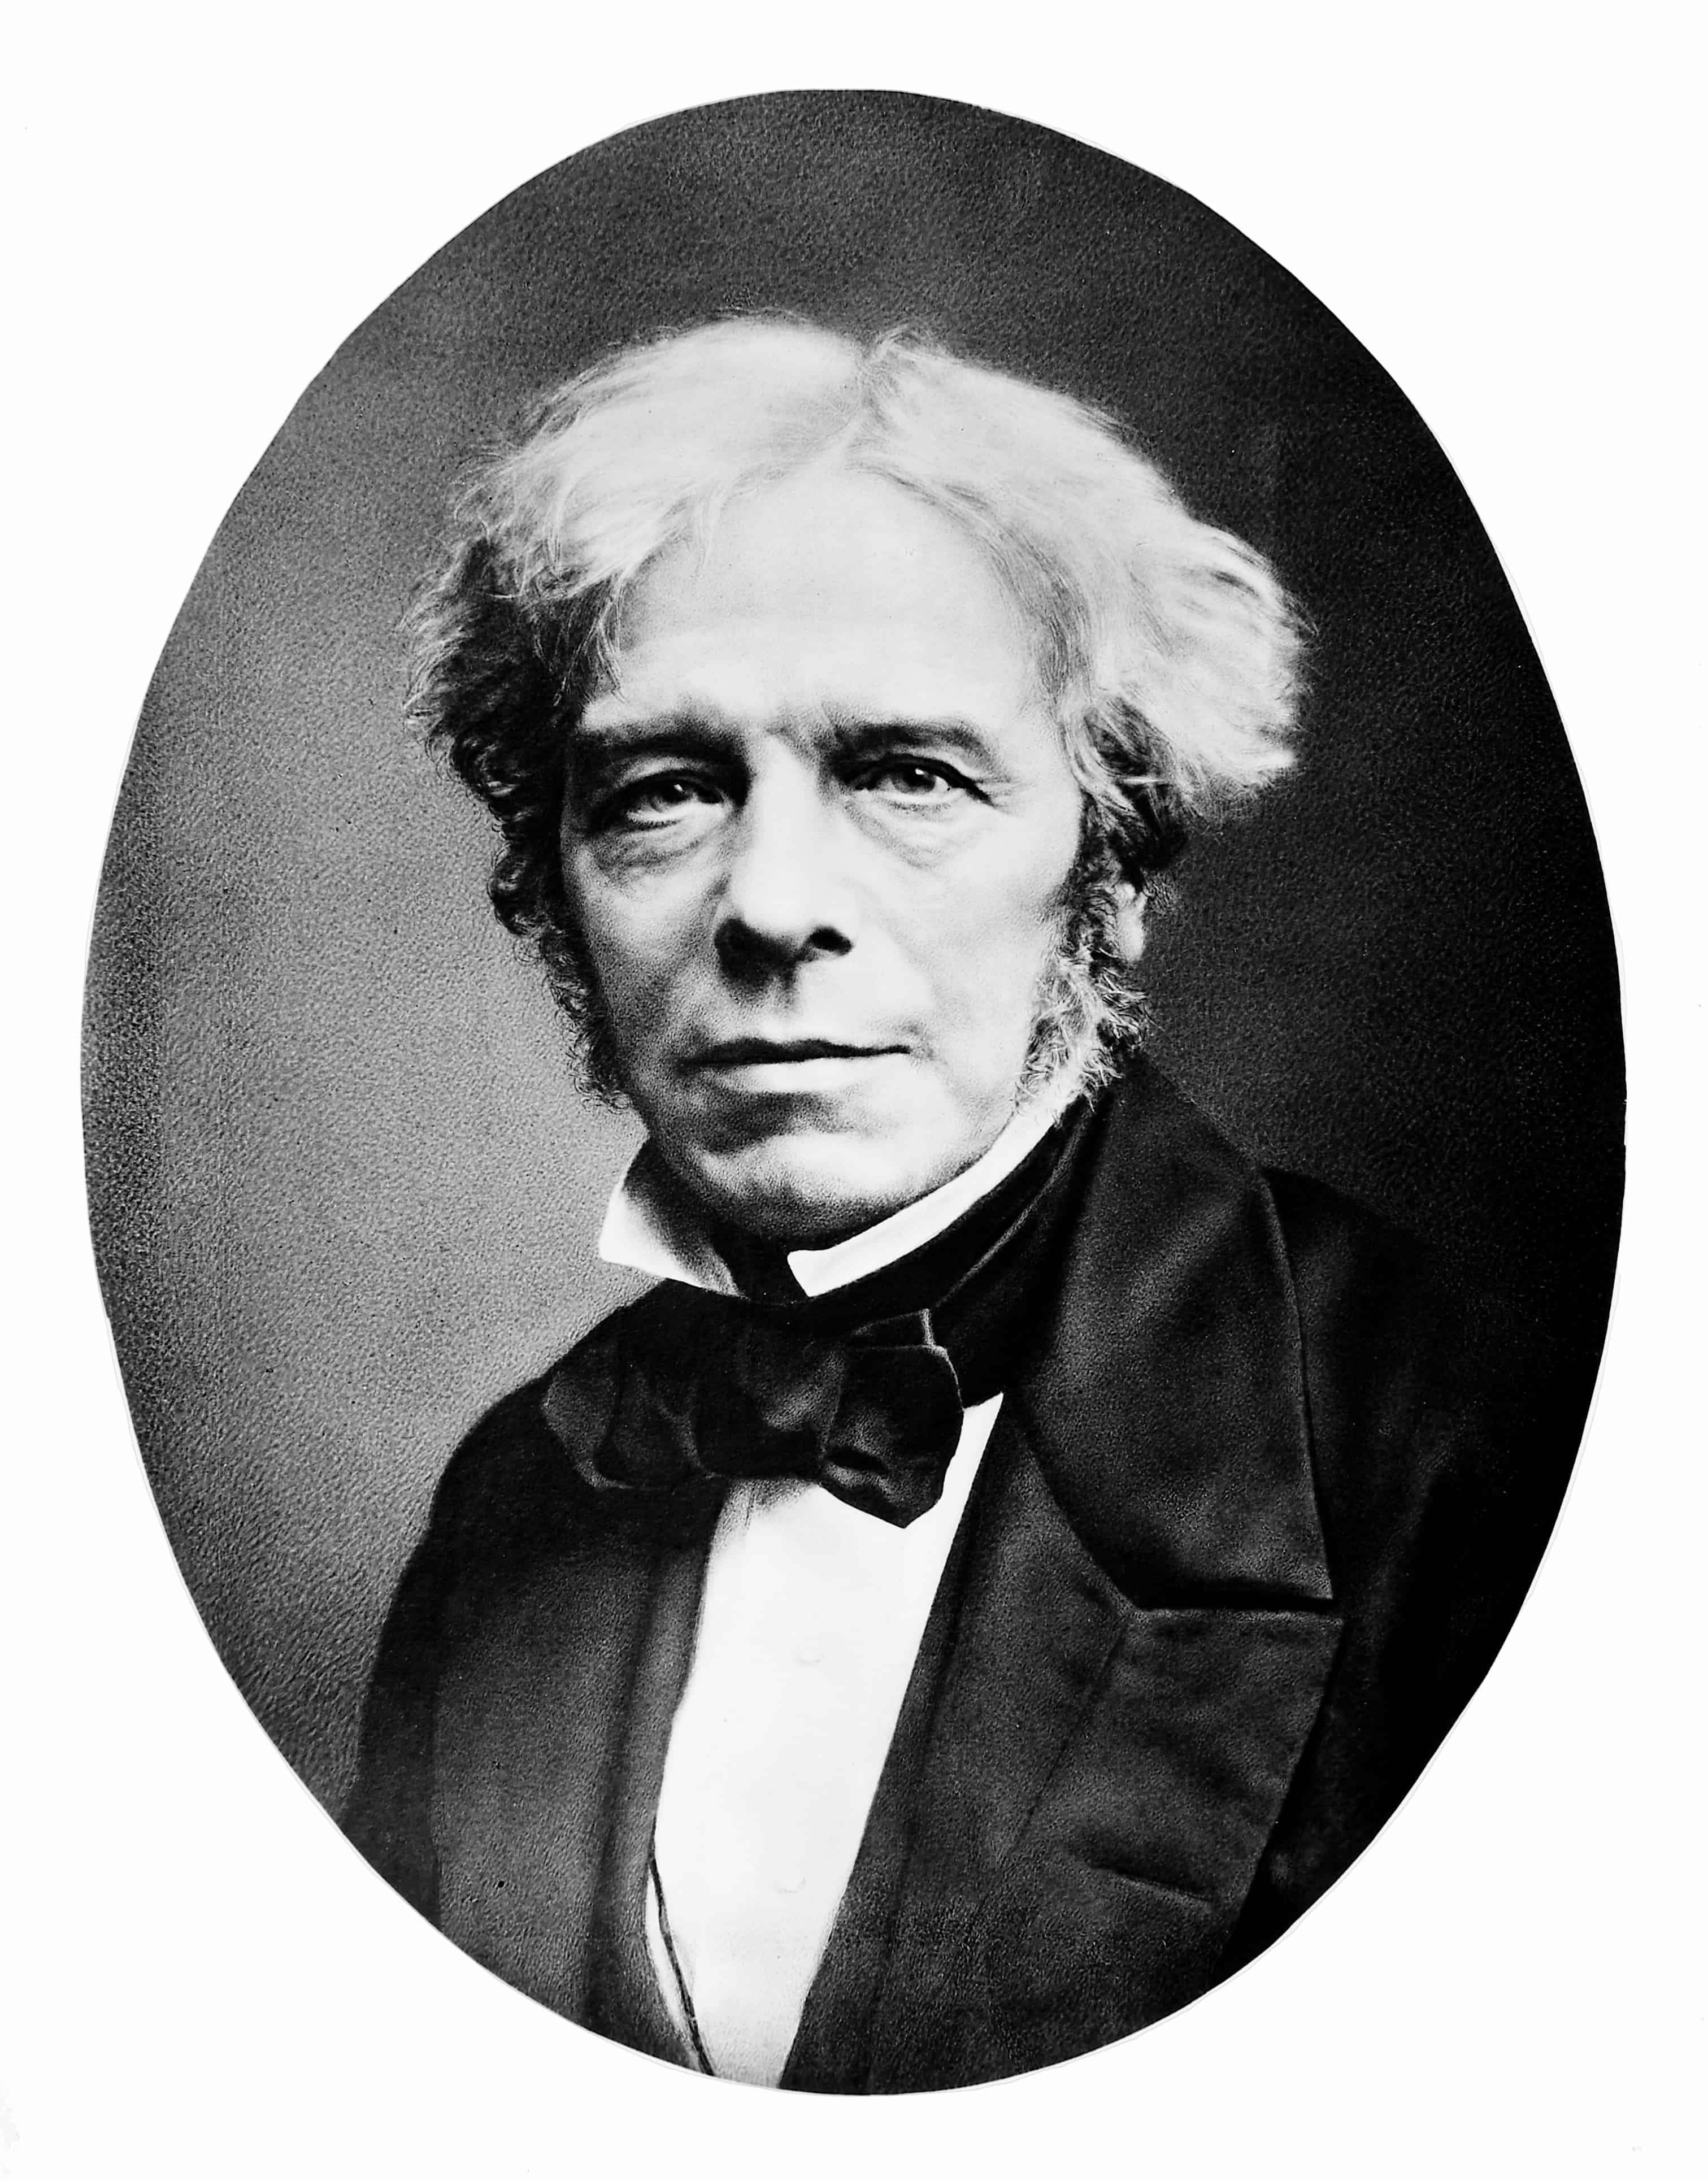 Michael Faraday, whose discoveries were central to the start of the electricity industry